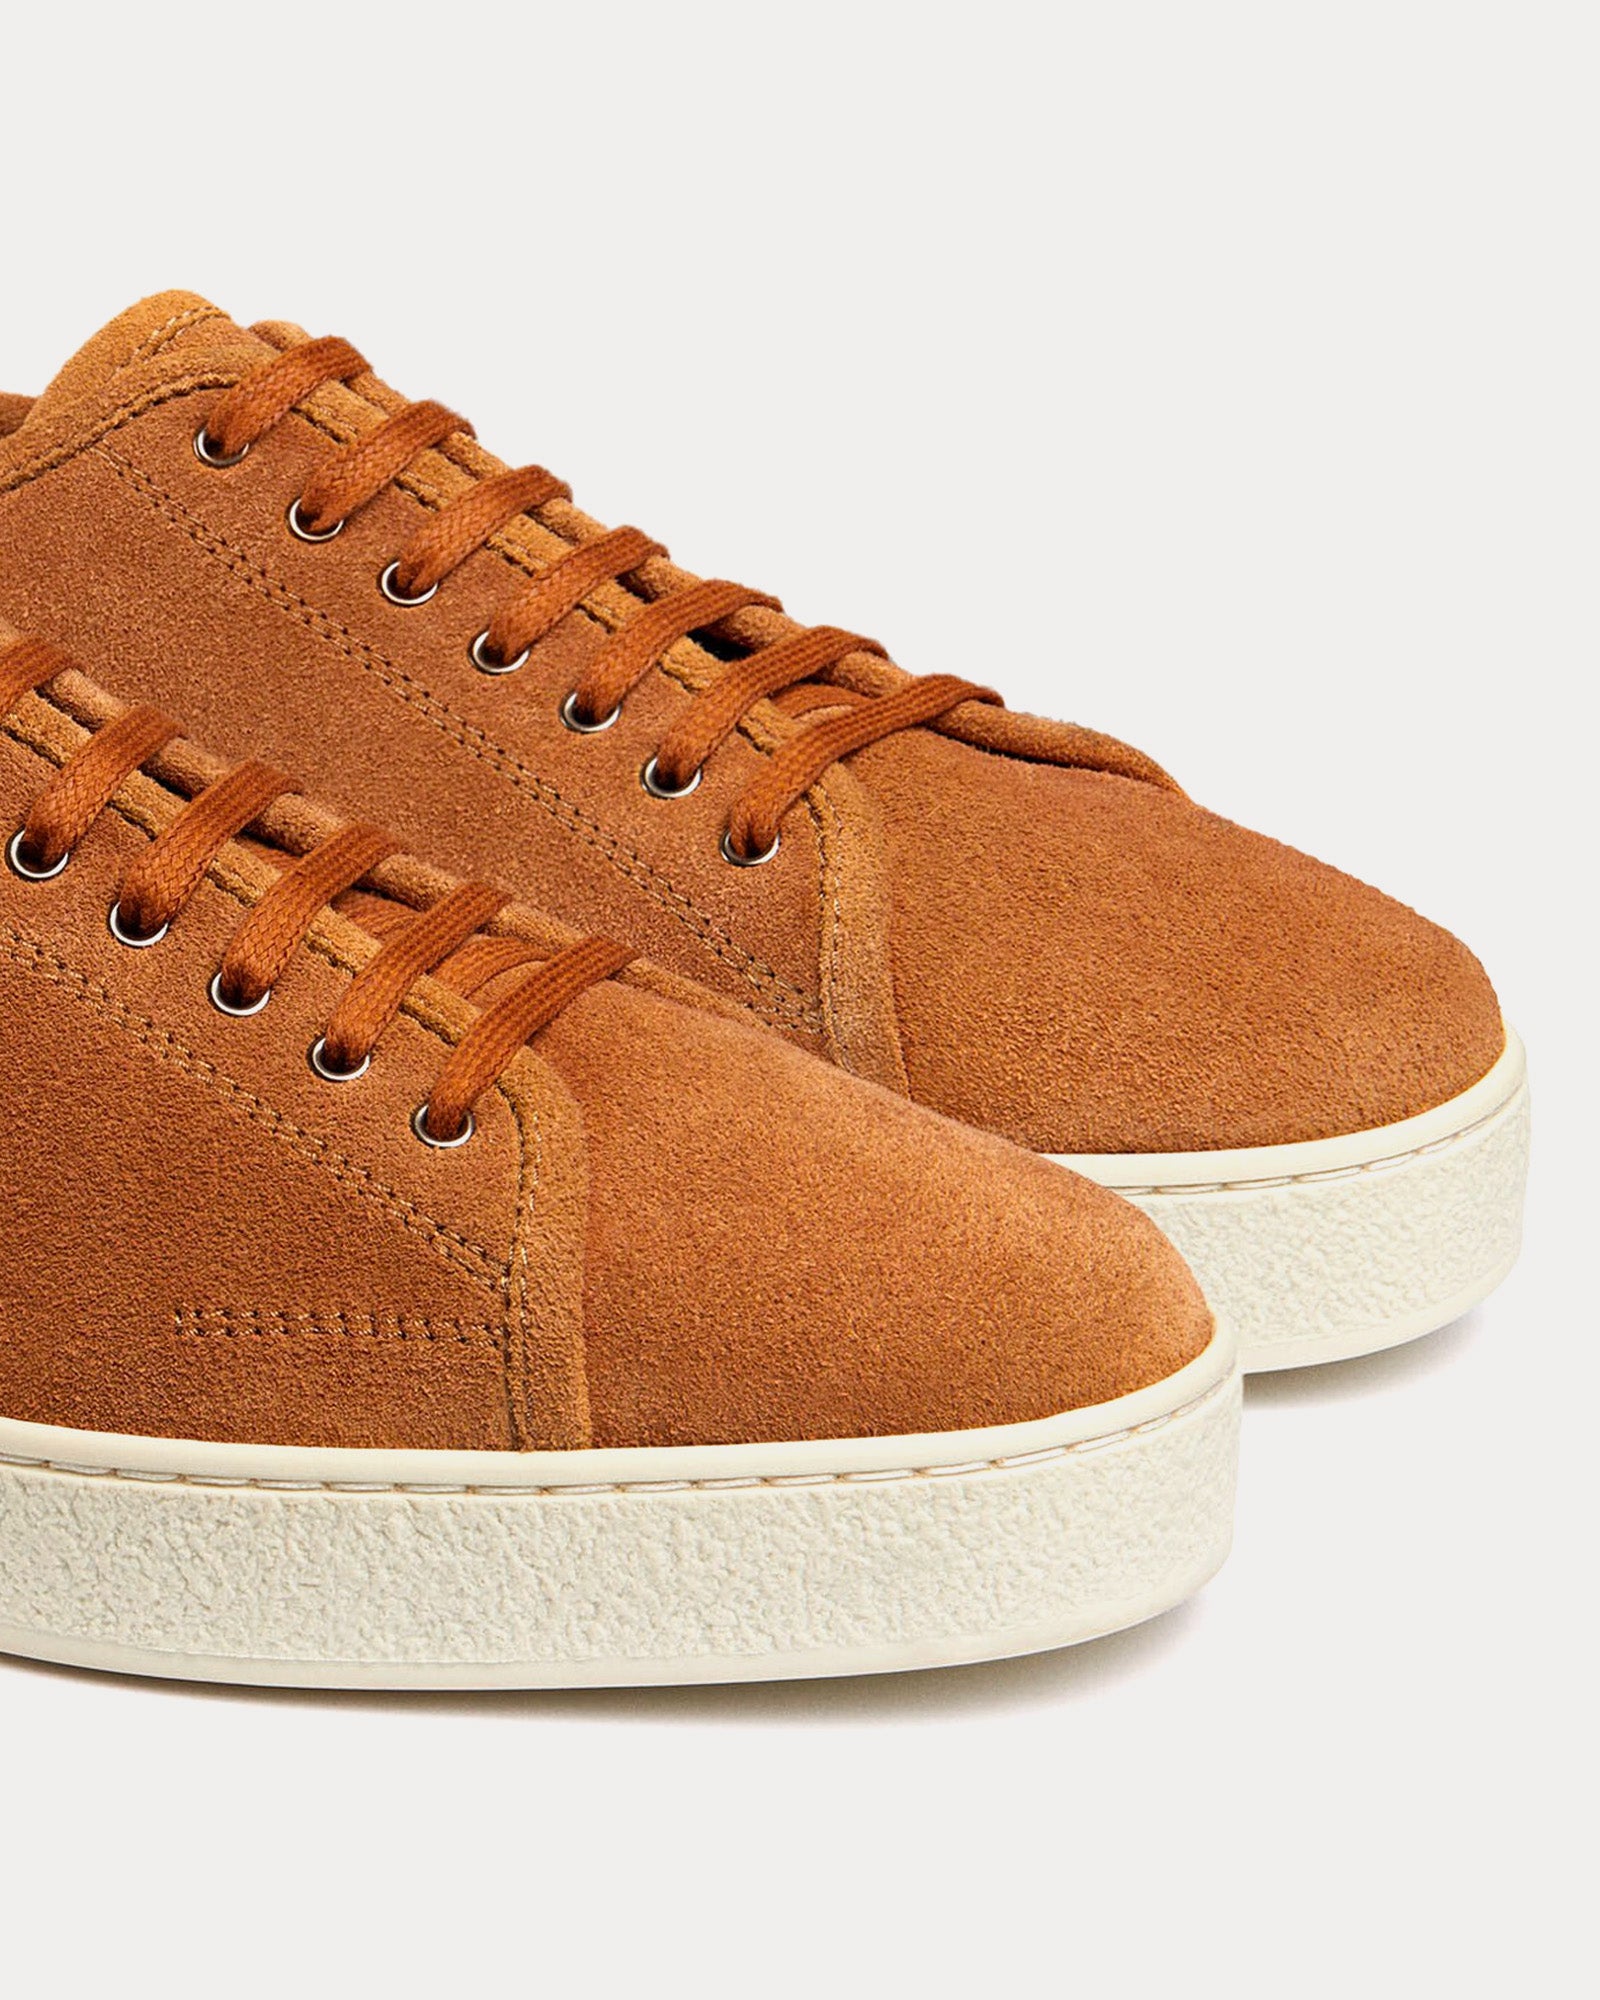 John Lobb - Stockwell Suede Cider Low Top Sneakers